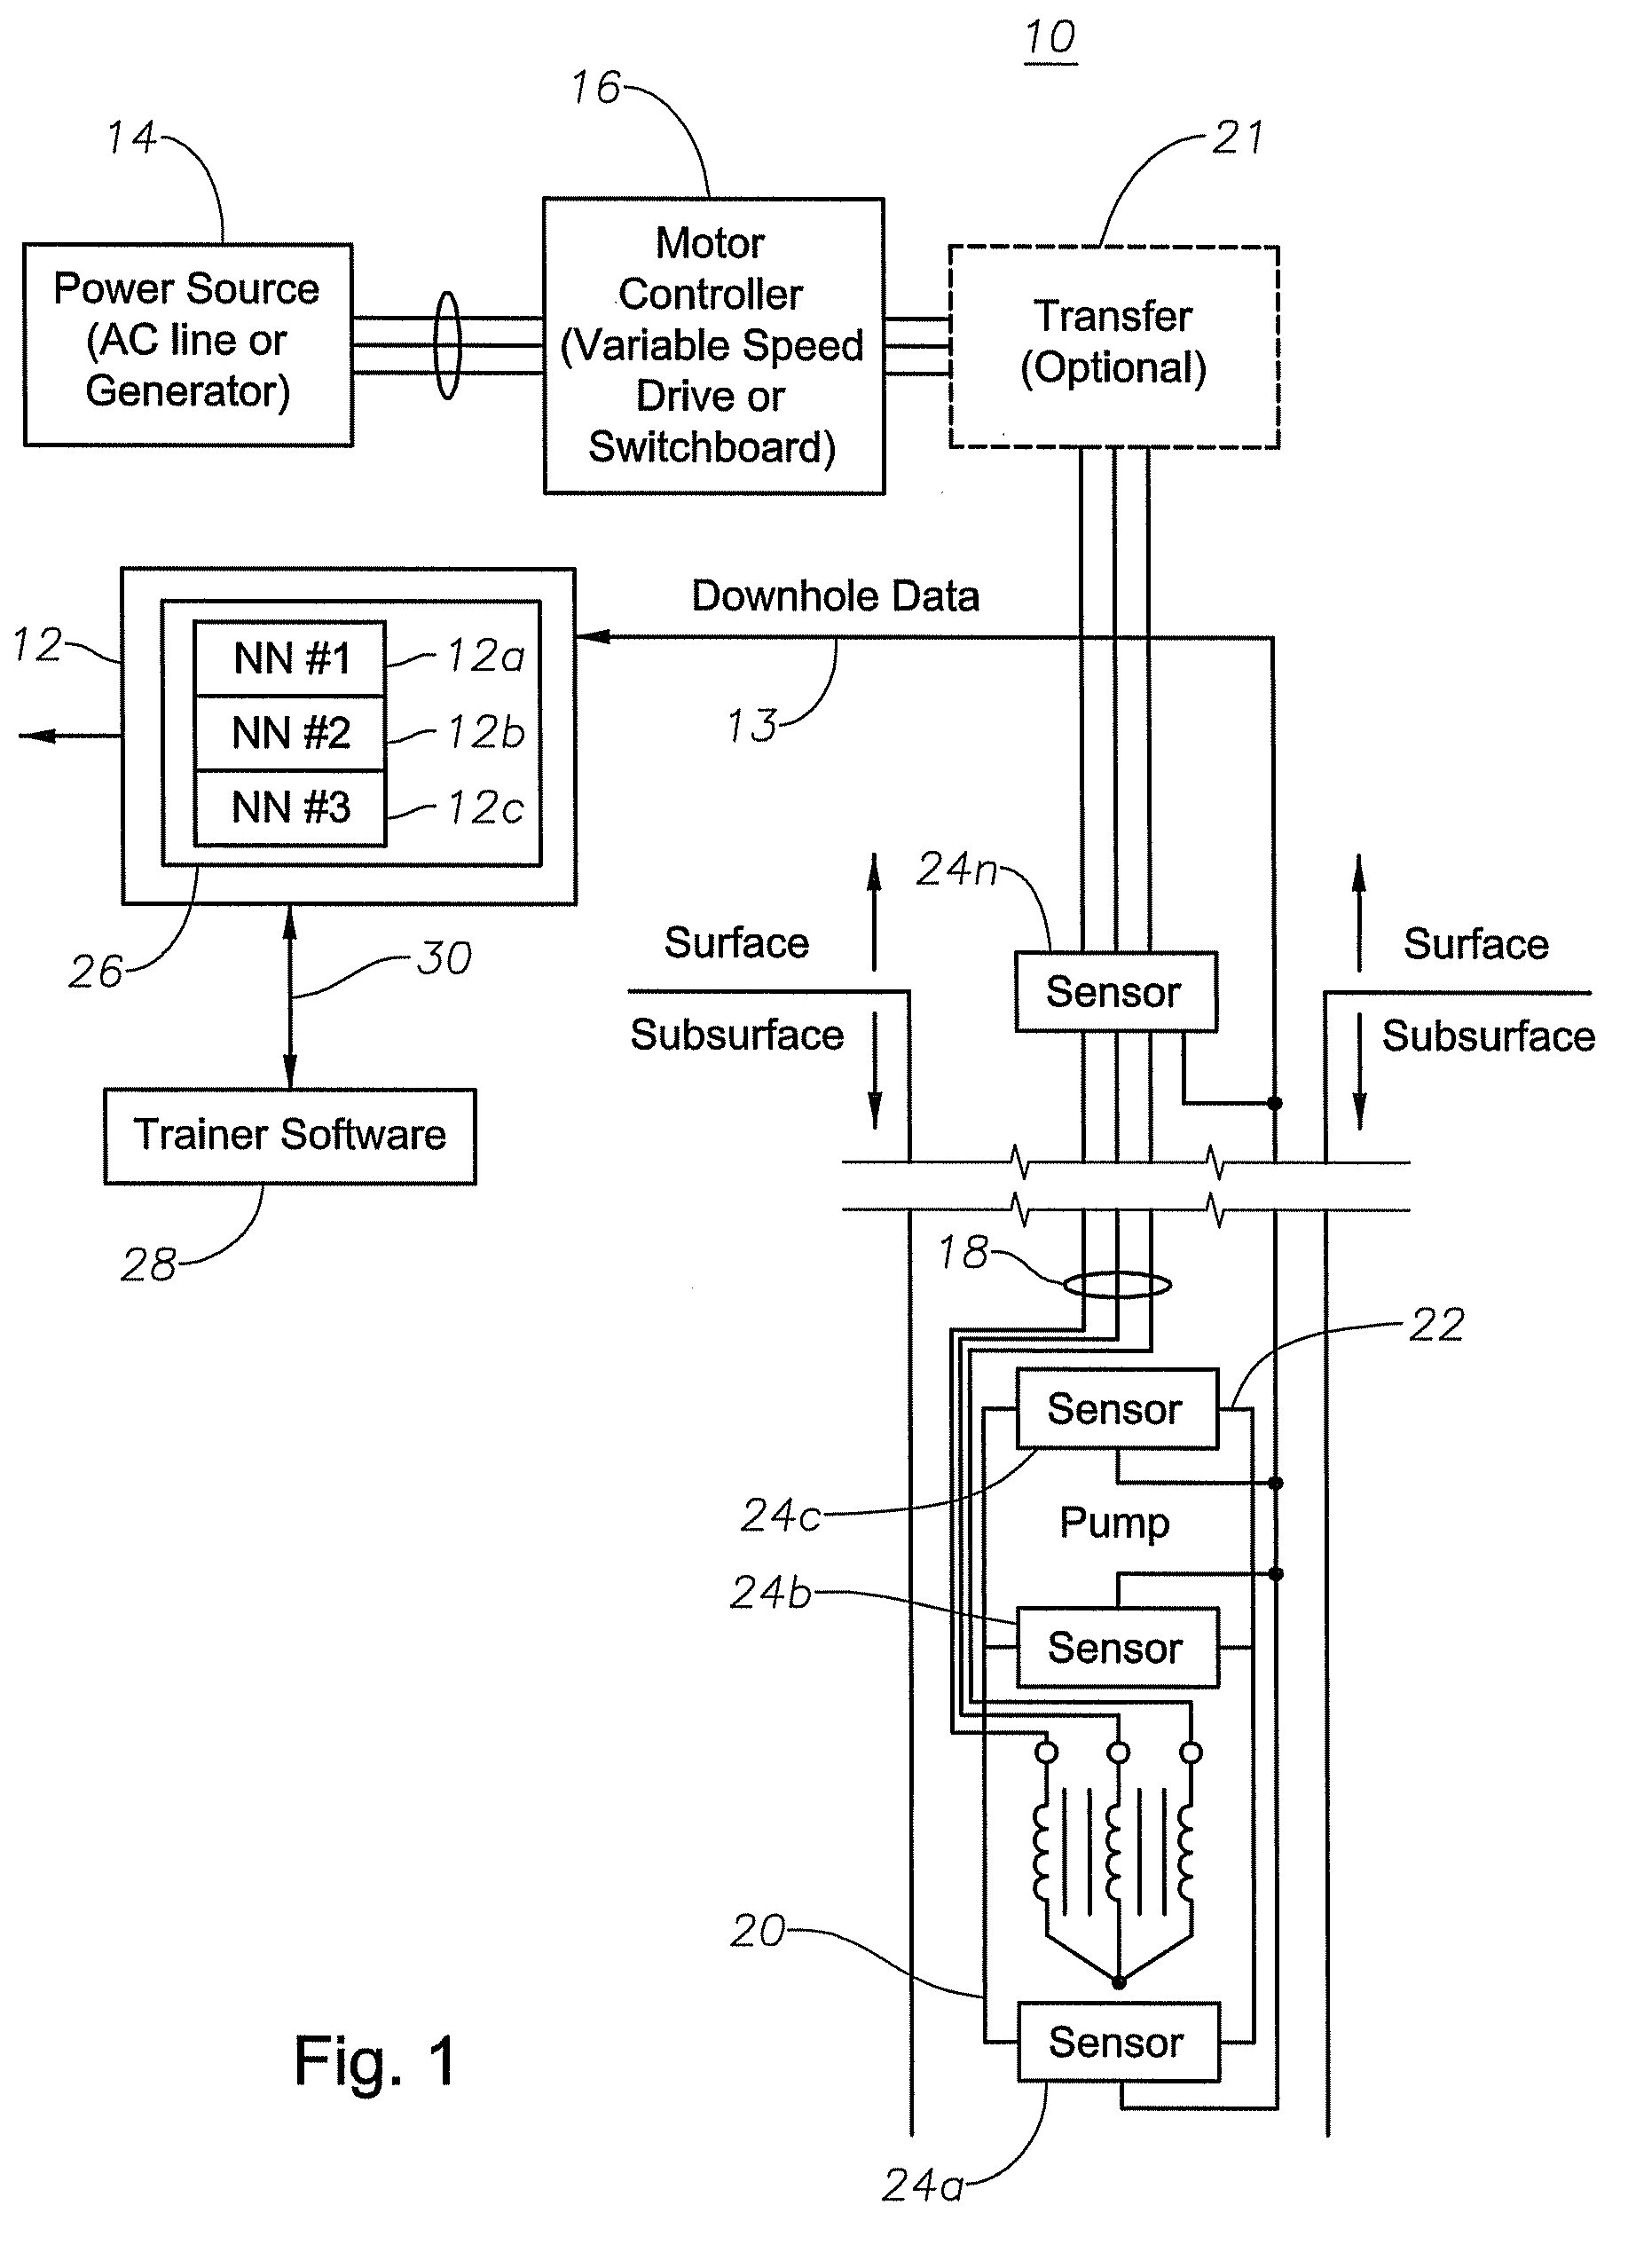 Multiphase flow meter for electrical submersible pumps using artificial neural networks